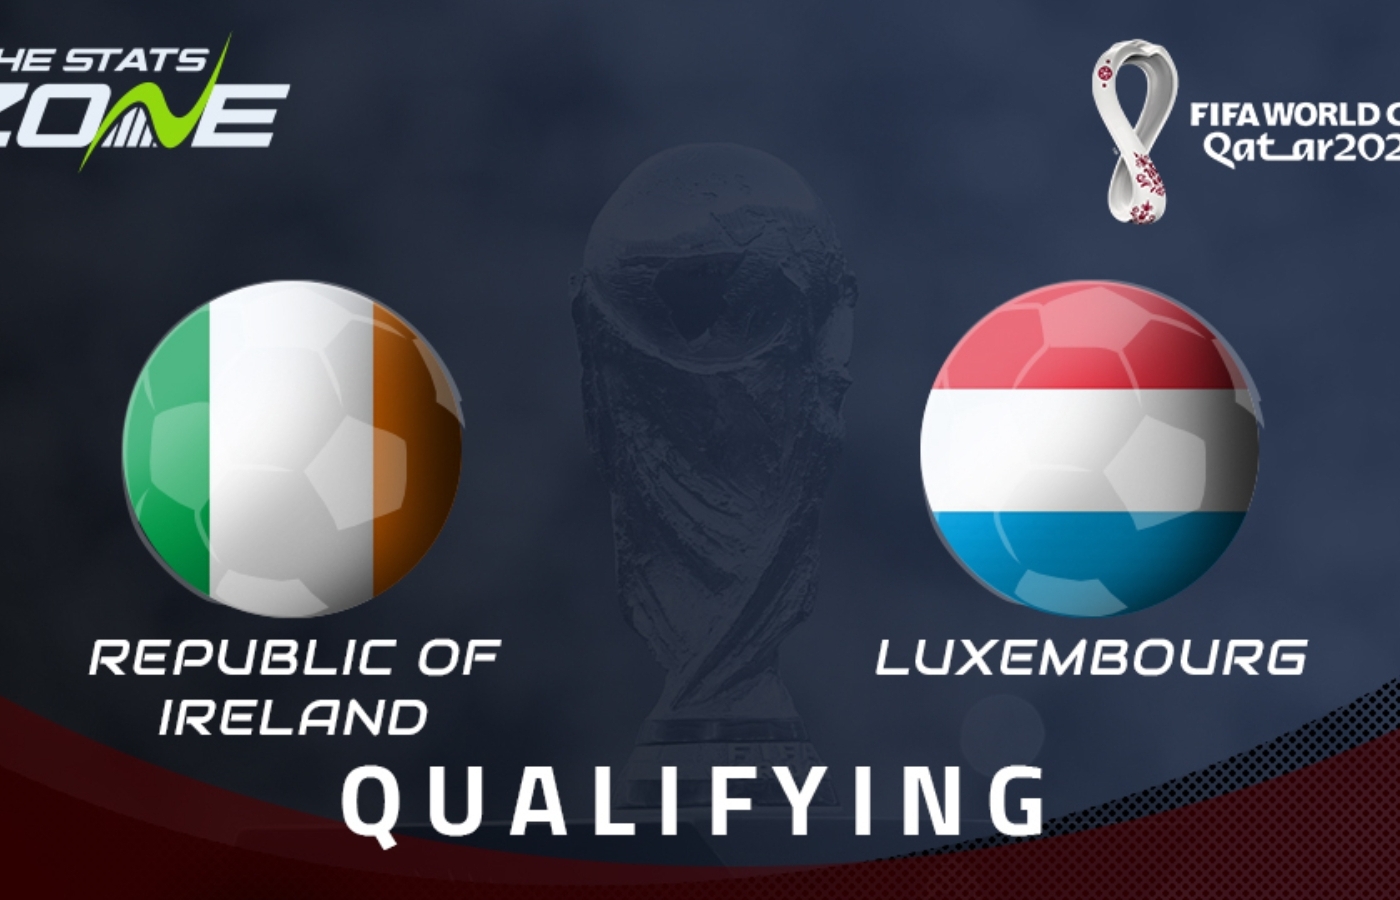 World Cup 2022 Republic of Ireland vs Luxembourg: Preview, Predictions and Betting Tips & Odds